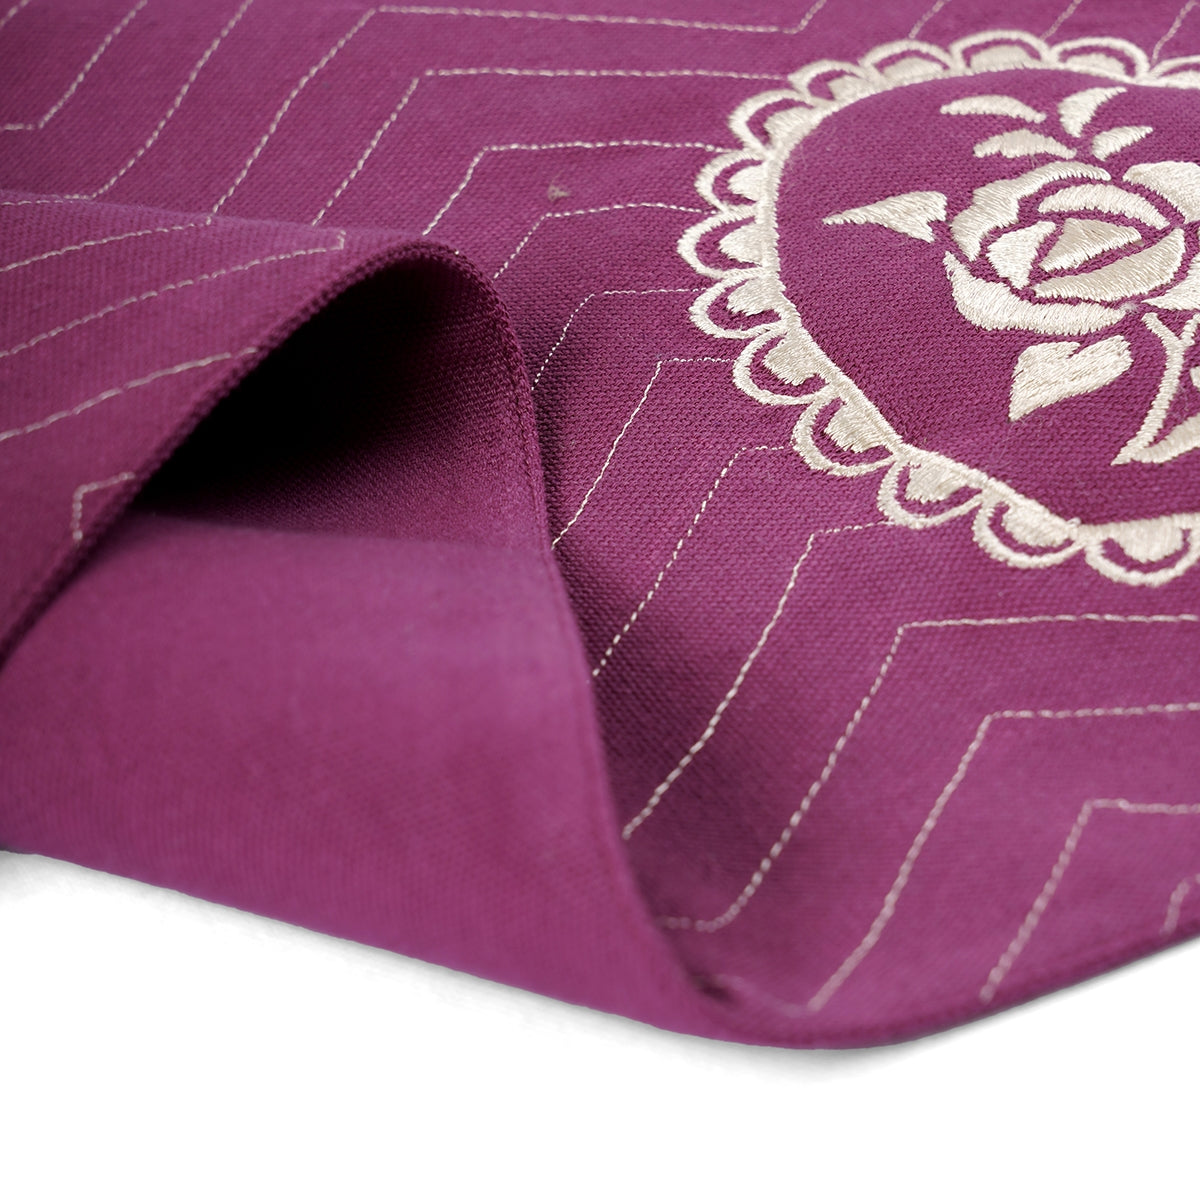 Maroon/Plum cotton Placemat with chevron and vintage rose motif embroidery, 13X19 inches